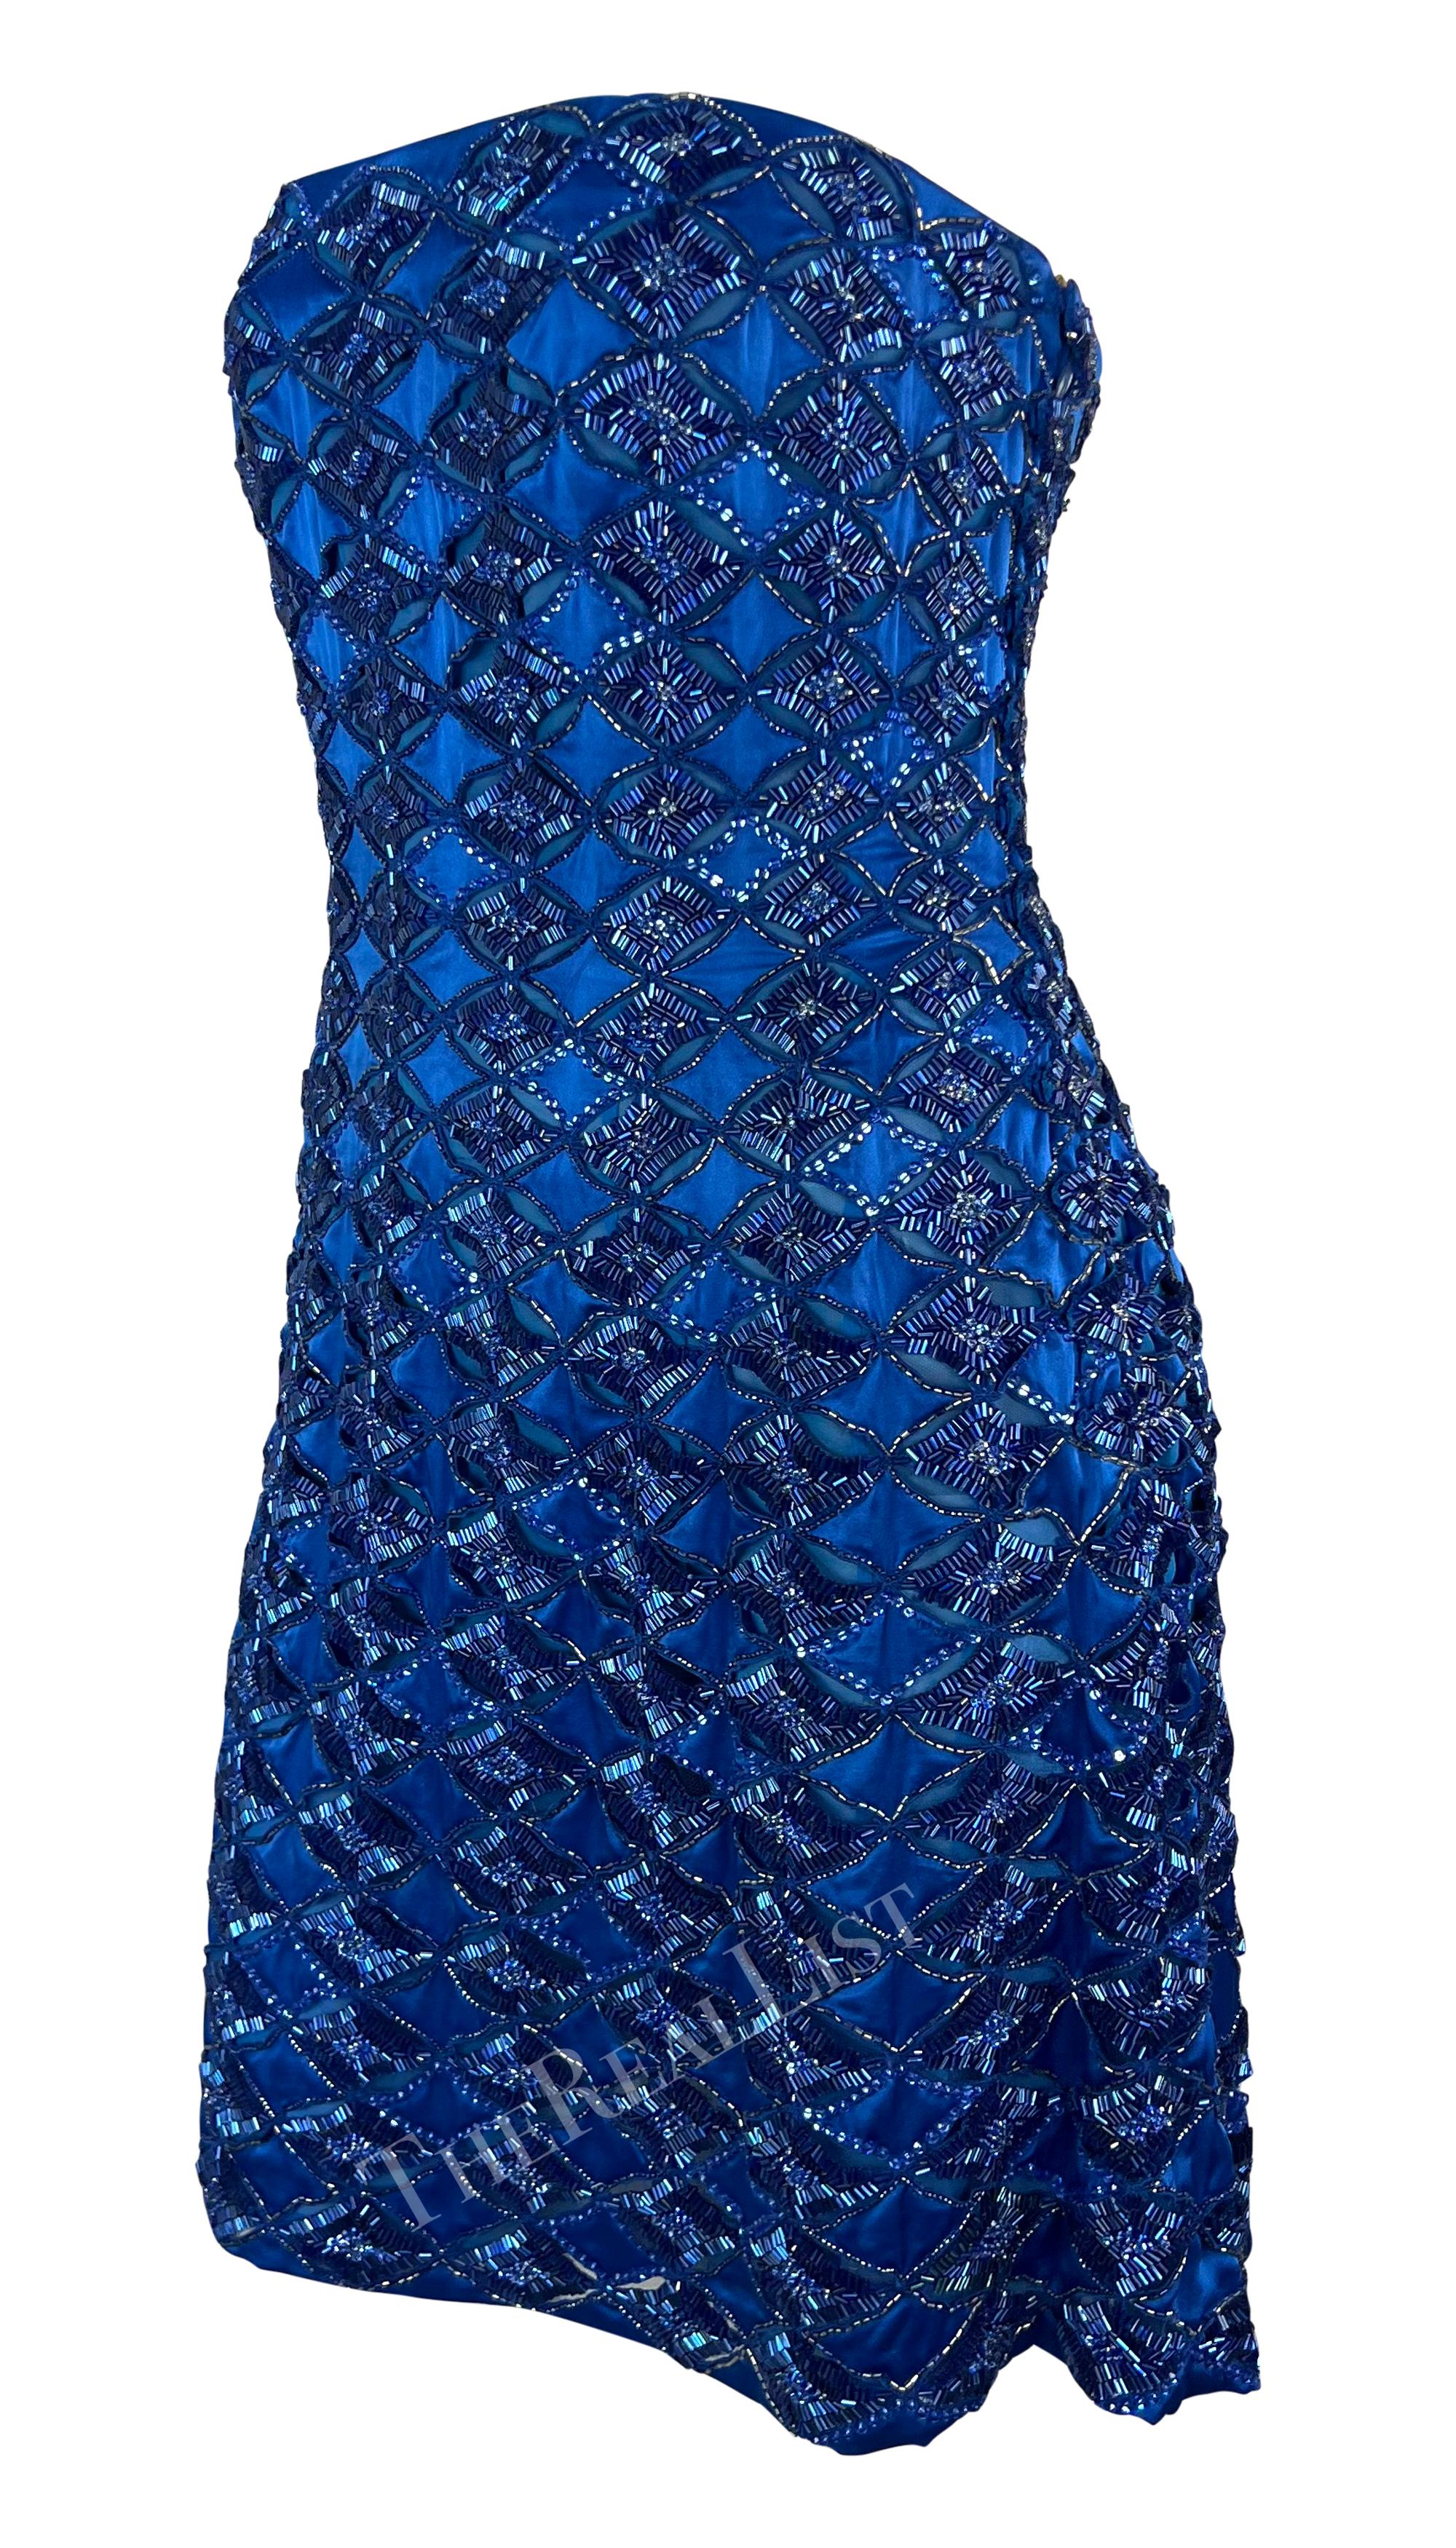 S/S 2001 Atelier Versace by Donatella Runway Blue Beaded Strapless Mini Dress For Sale 2